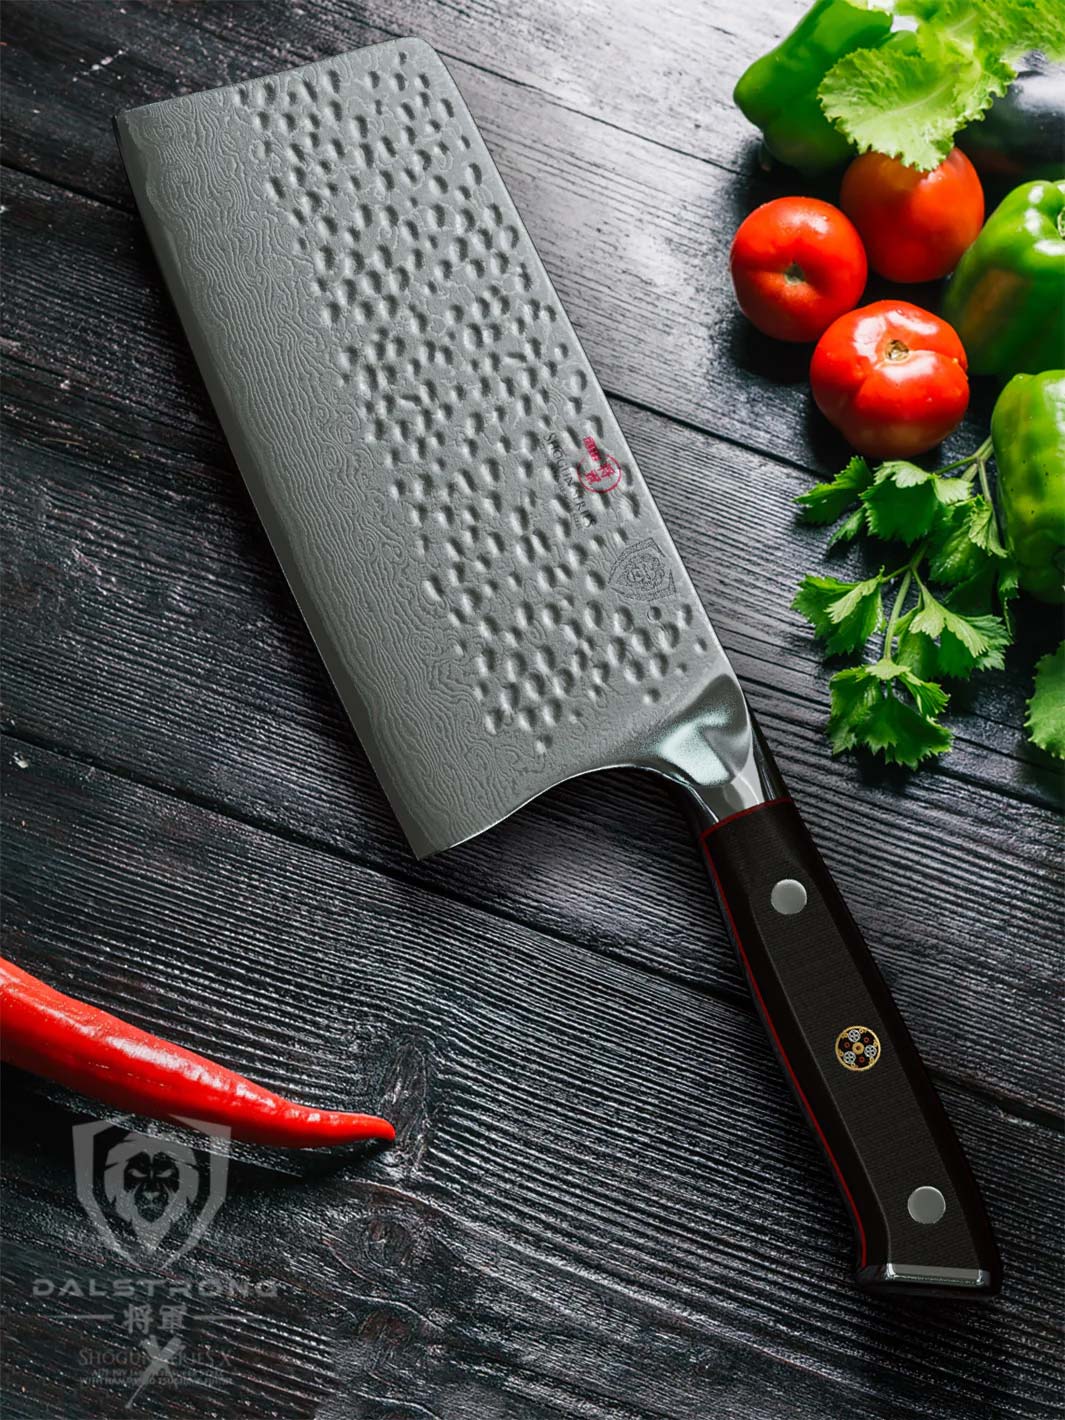 Dalstrong shogun series 7 inch cleaver knife with black handle and vegetables beside.